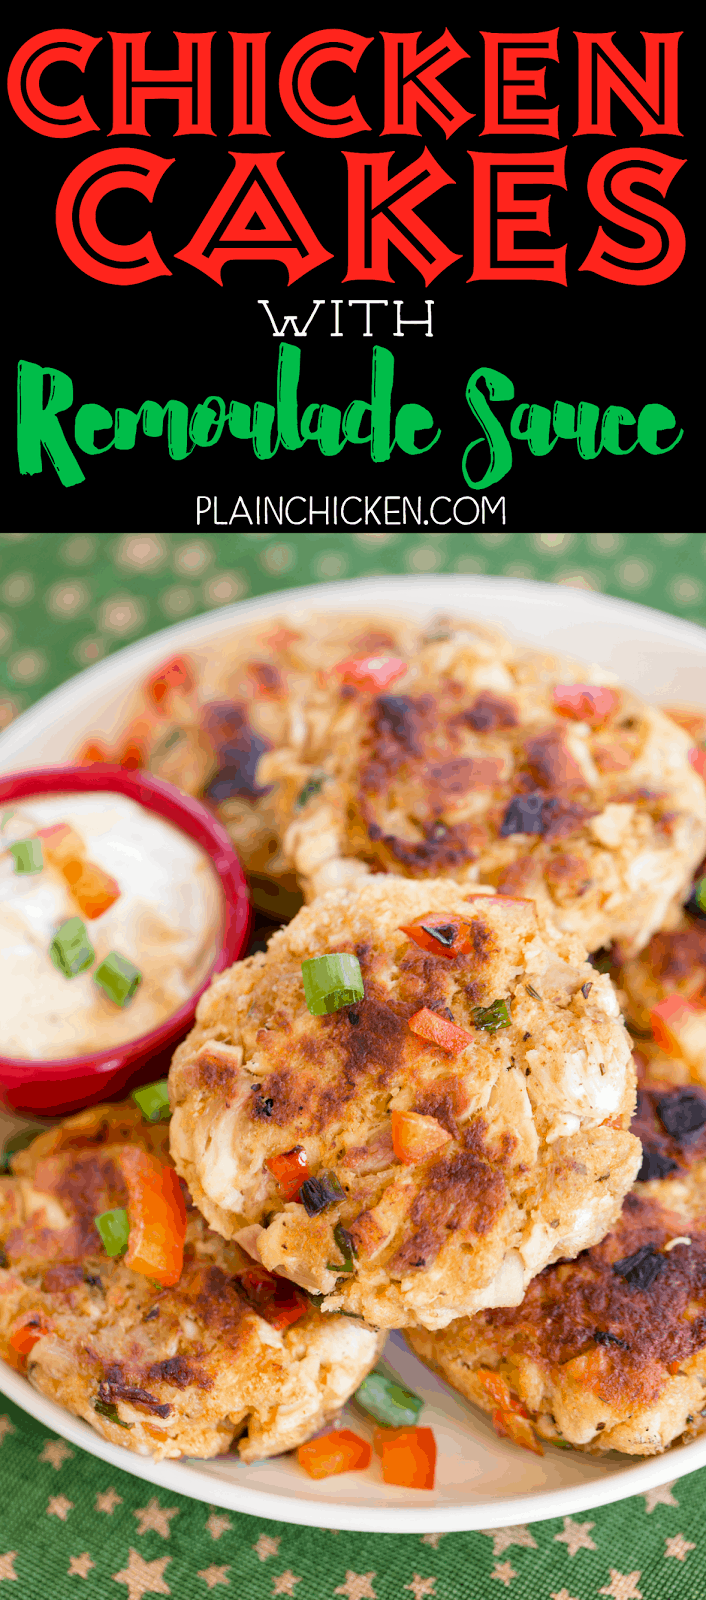 Chicken Cakes with Remoulade Sauce - CRAZY good!! Perfect for holiday parties! Chicken, red pepper, green onions, mayo, mustard, Kikkoman Panko bread crumbs, cajun seasoning and egg. Ready in minutes. Can make large cakes for a main dish or smaller cakes for appetizers. Make ahead and freeze for later.